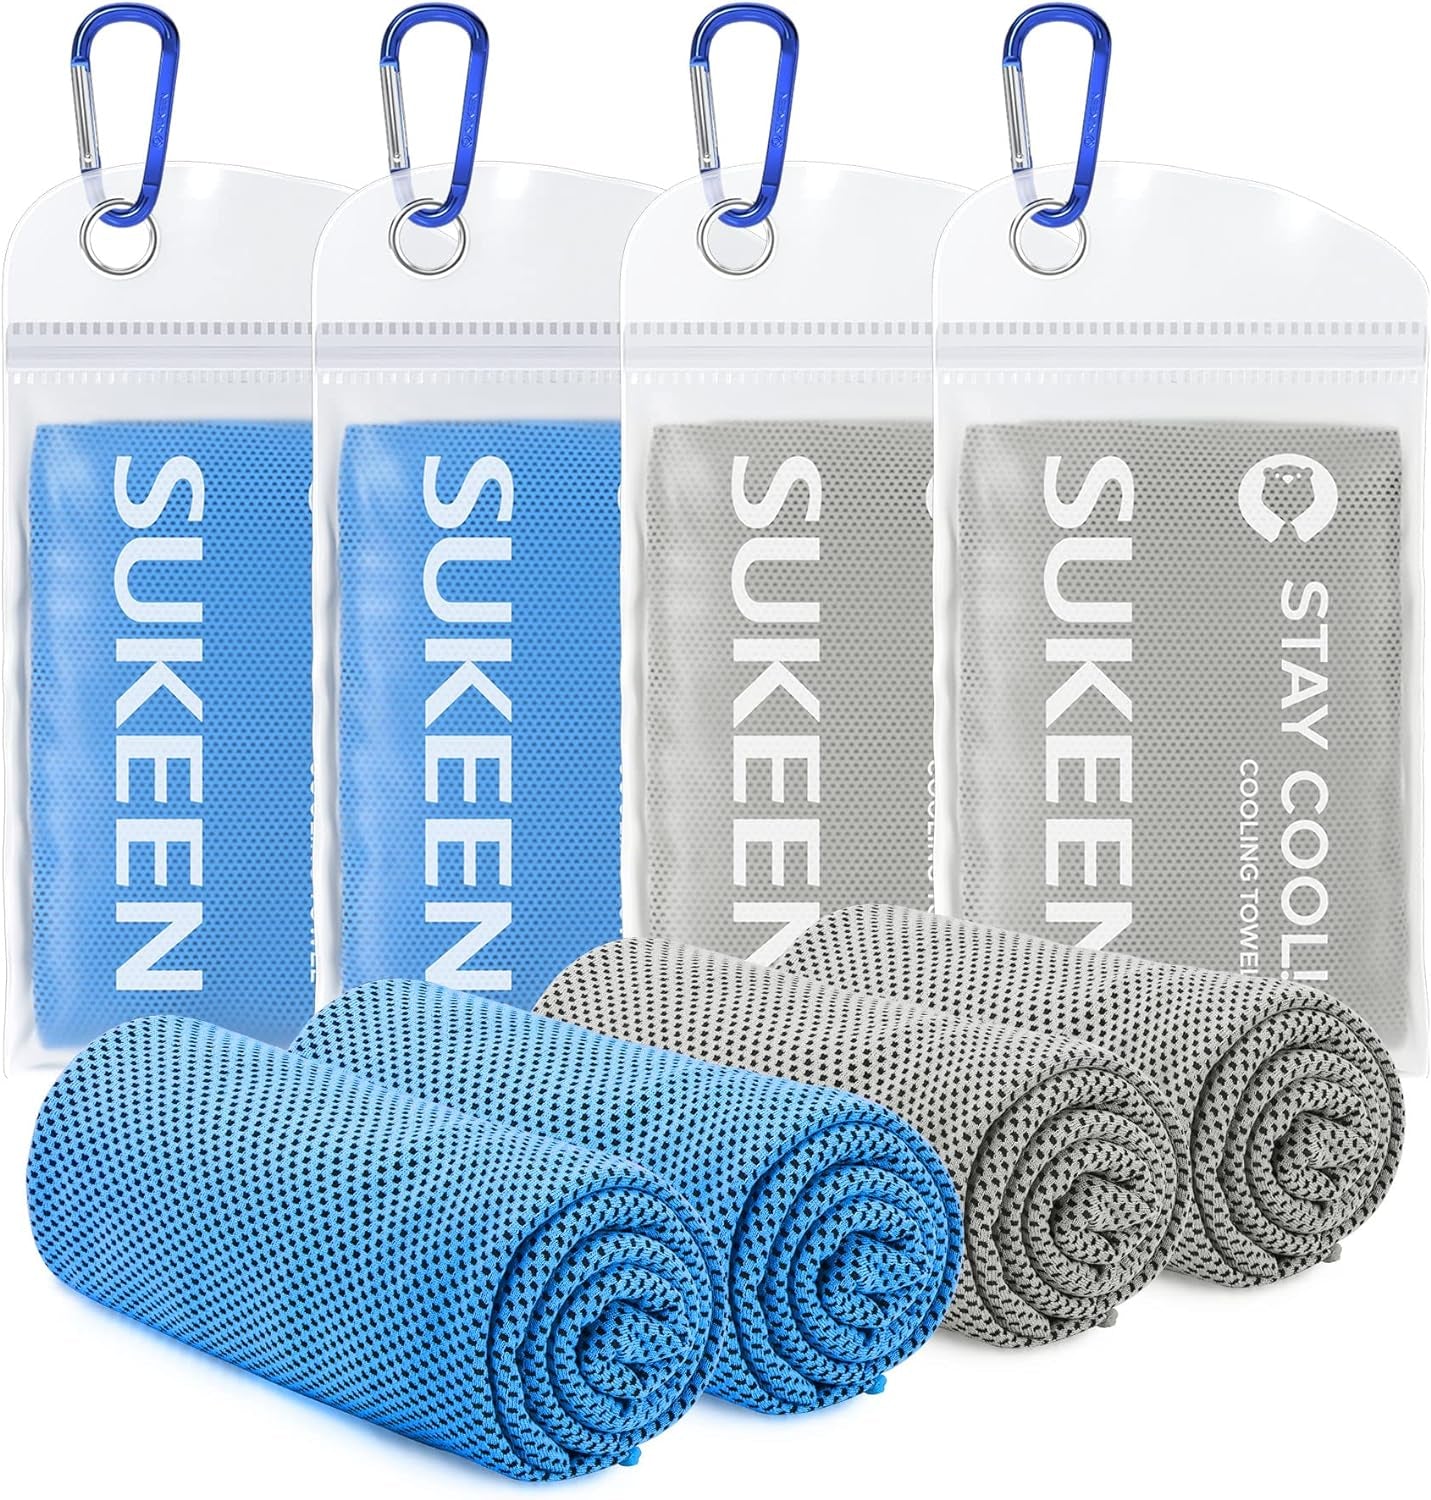 [4 Pack Cooling Towel (40"X12"), Ice Towel, Soft Breathable Chilly Towel, Microfiber Towel for Yoga, Sport, Running, Gym, Workout,Camping, Fitness, Workout & More Activities